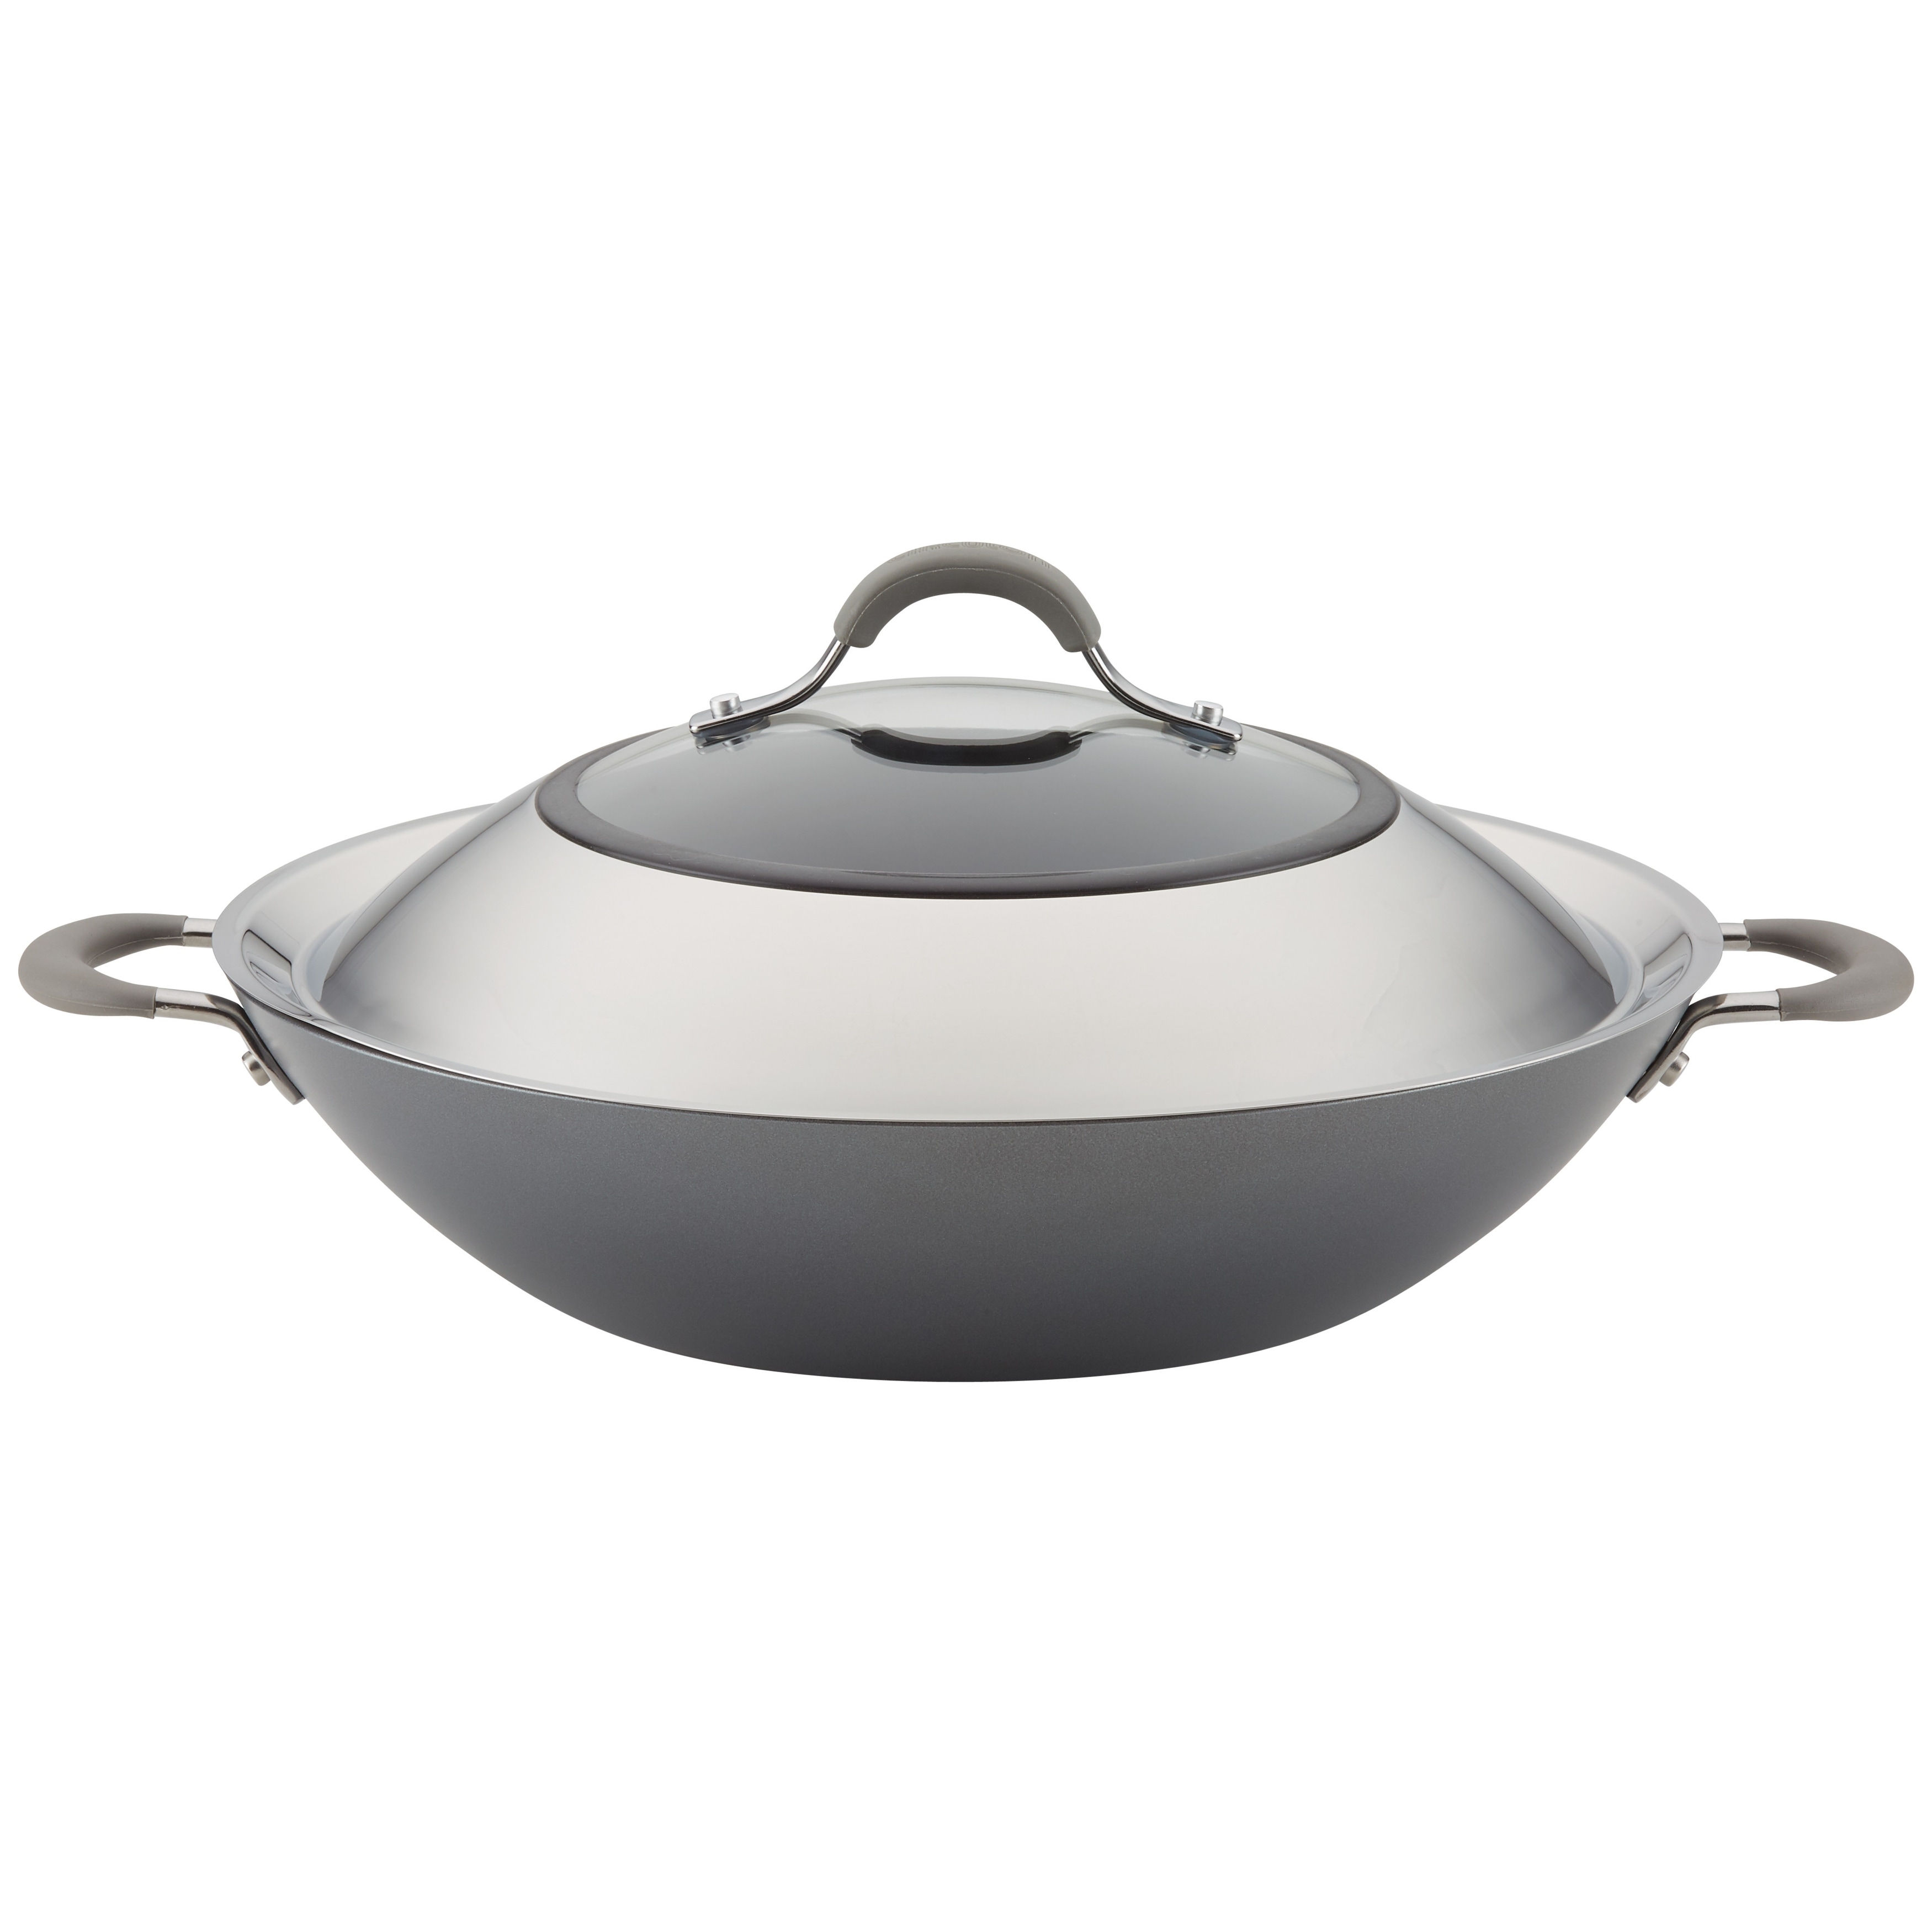 https://ak1.ostkcdn.com/images/products/is/images/direct/10ad321f69f02ca0abfec21da37107efcdb78d6c/Circulon-Elementum-Hard-Anodized-Nonstick-Wok-with-Side-Handles-and-Lid%2C-14-Inch%2C-Oyster-Gray.jpg